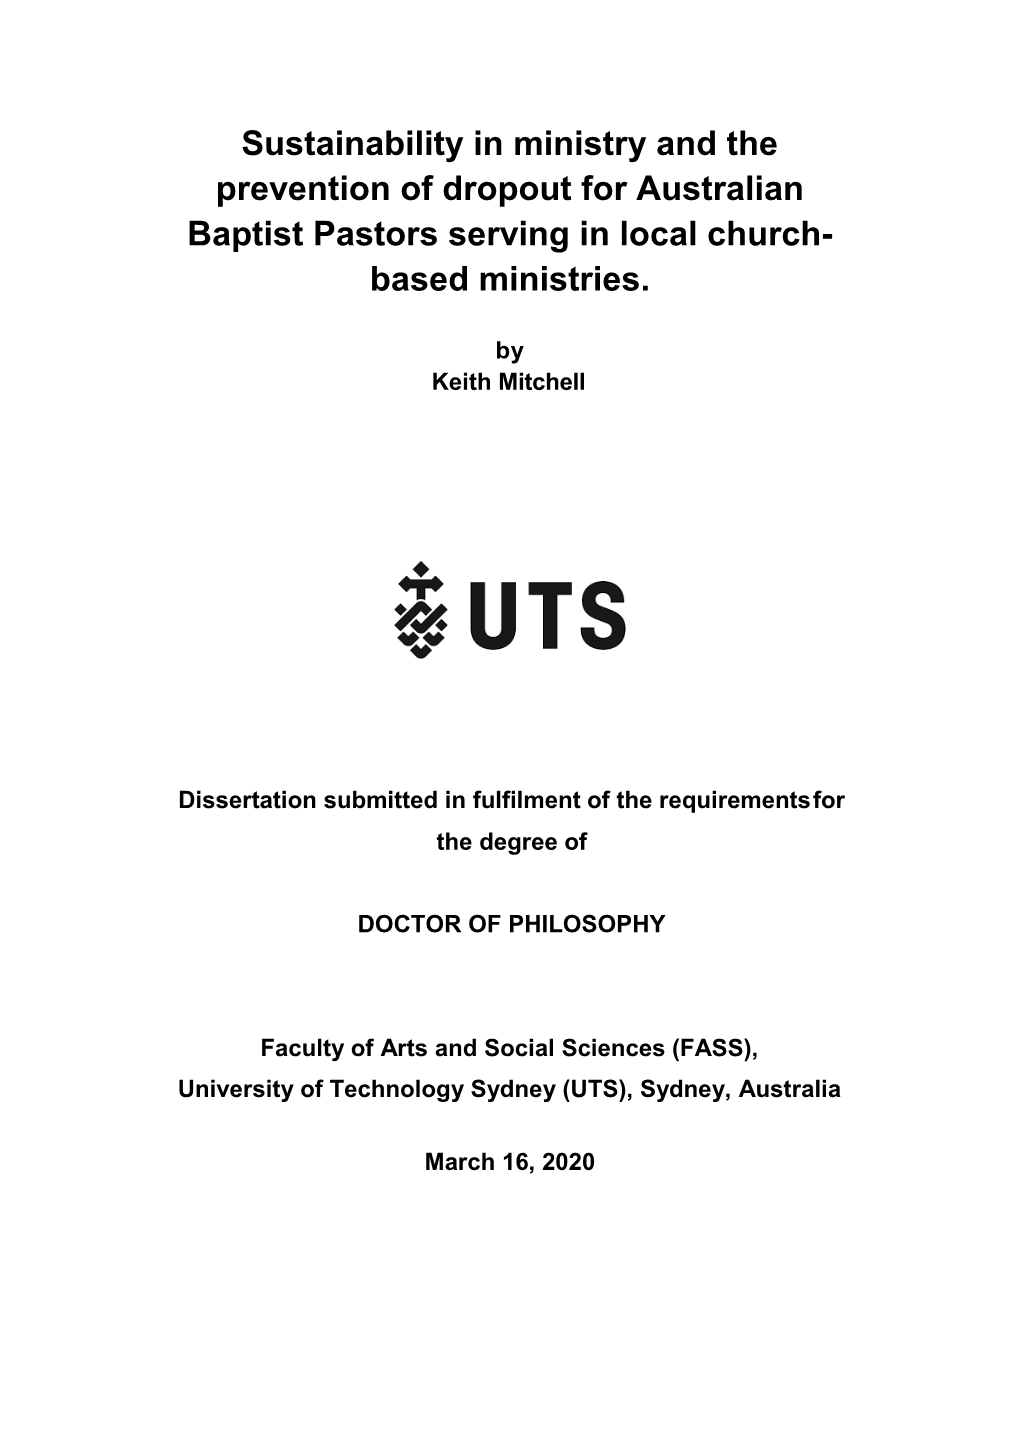 Sustainability in Ministry and the Prevention of Dropout for Australian Baptist Pastors Serving in Local Church- Based Ministries